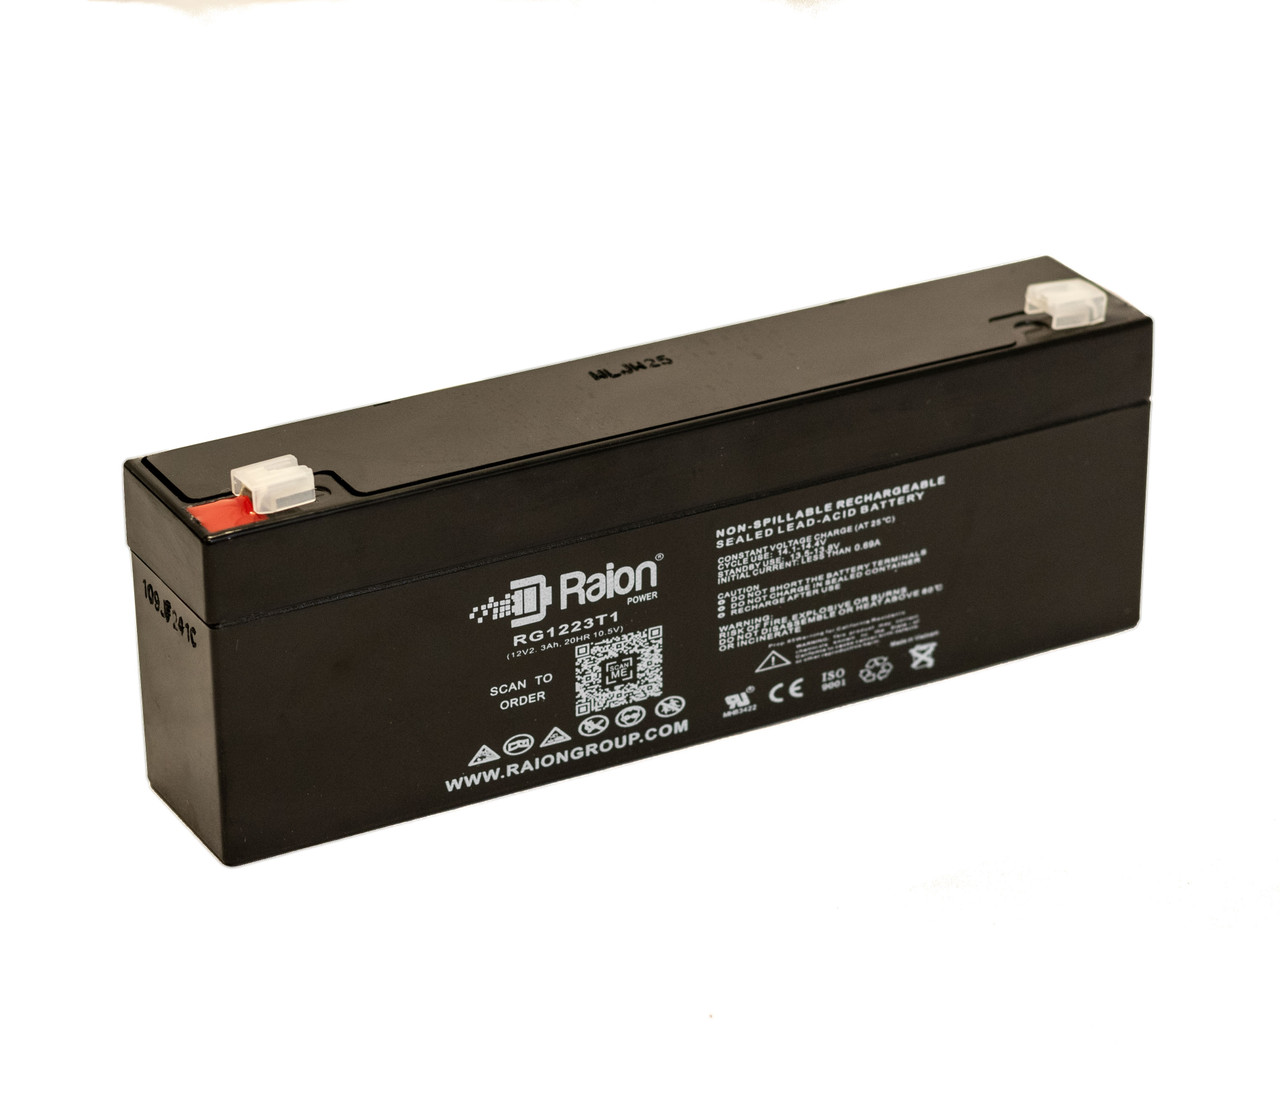 Raion Power RG1223T1 Replacement Battery for Canbat CBL2.4-12